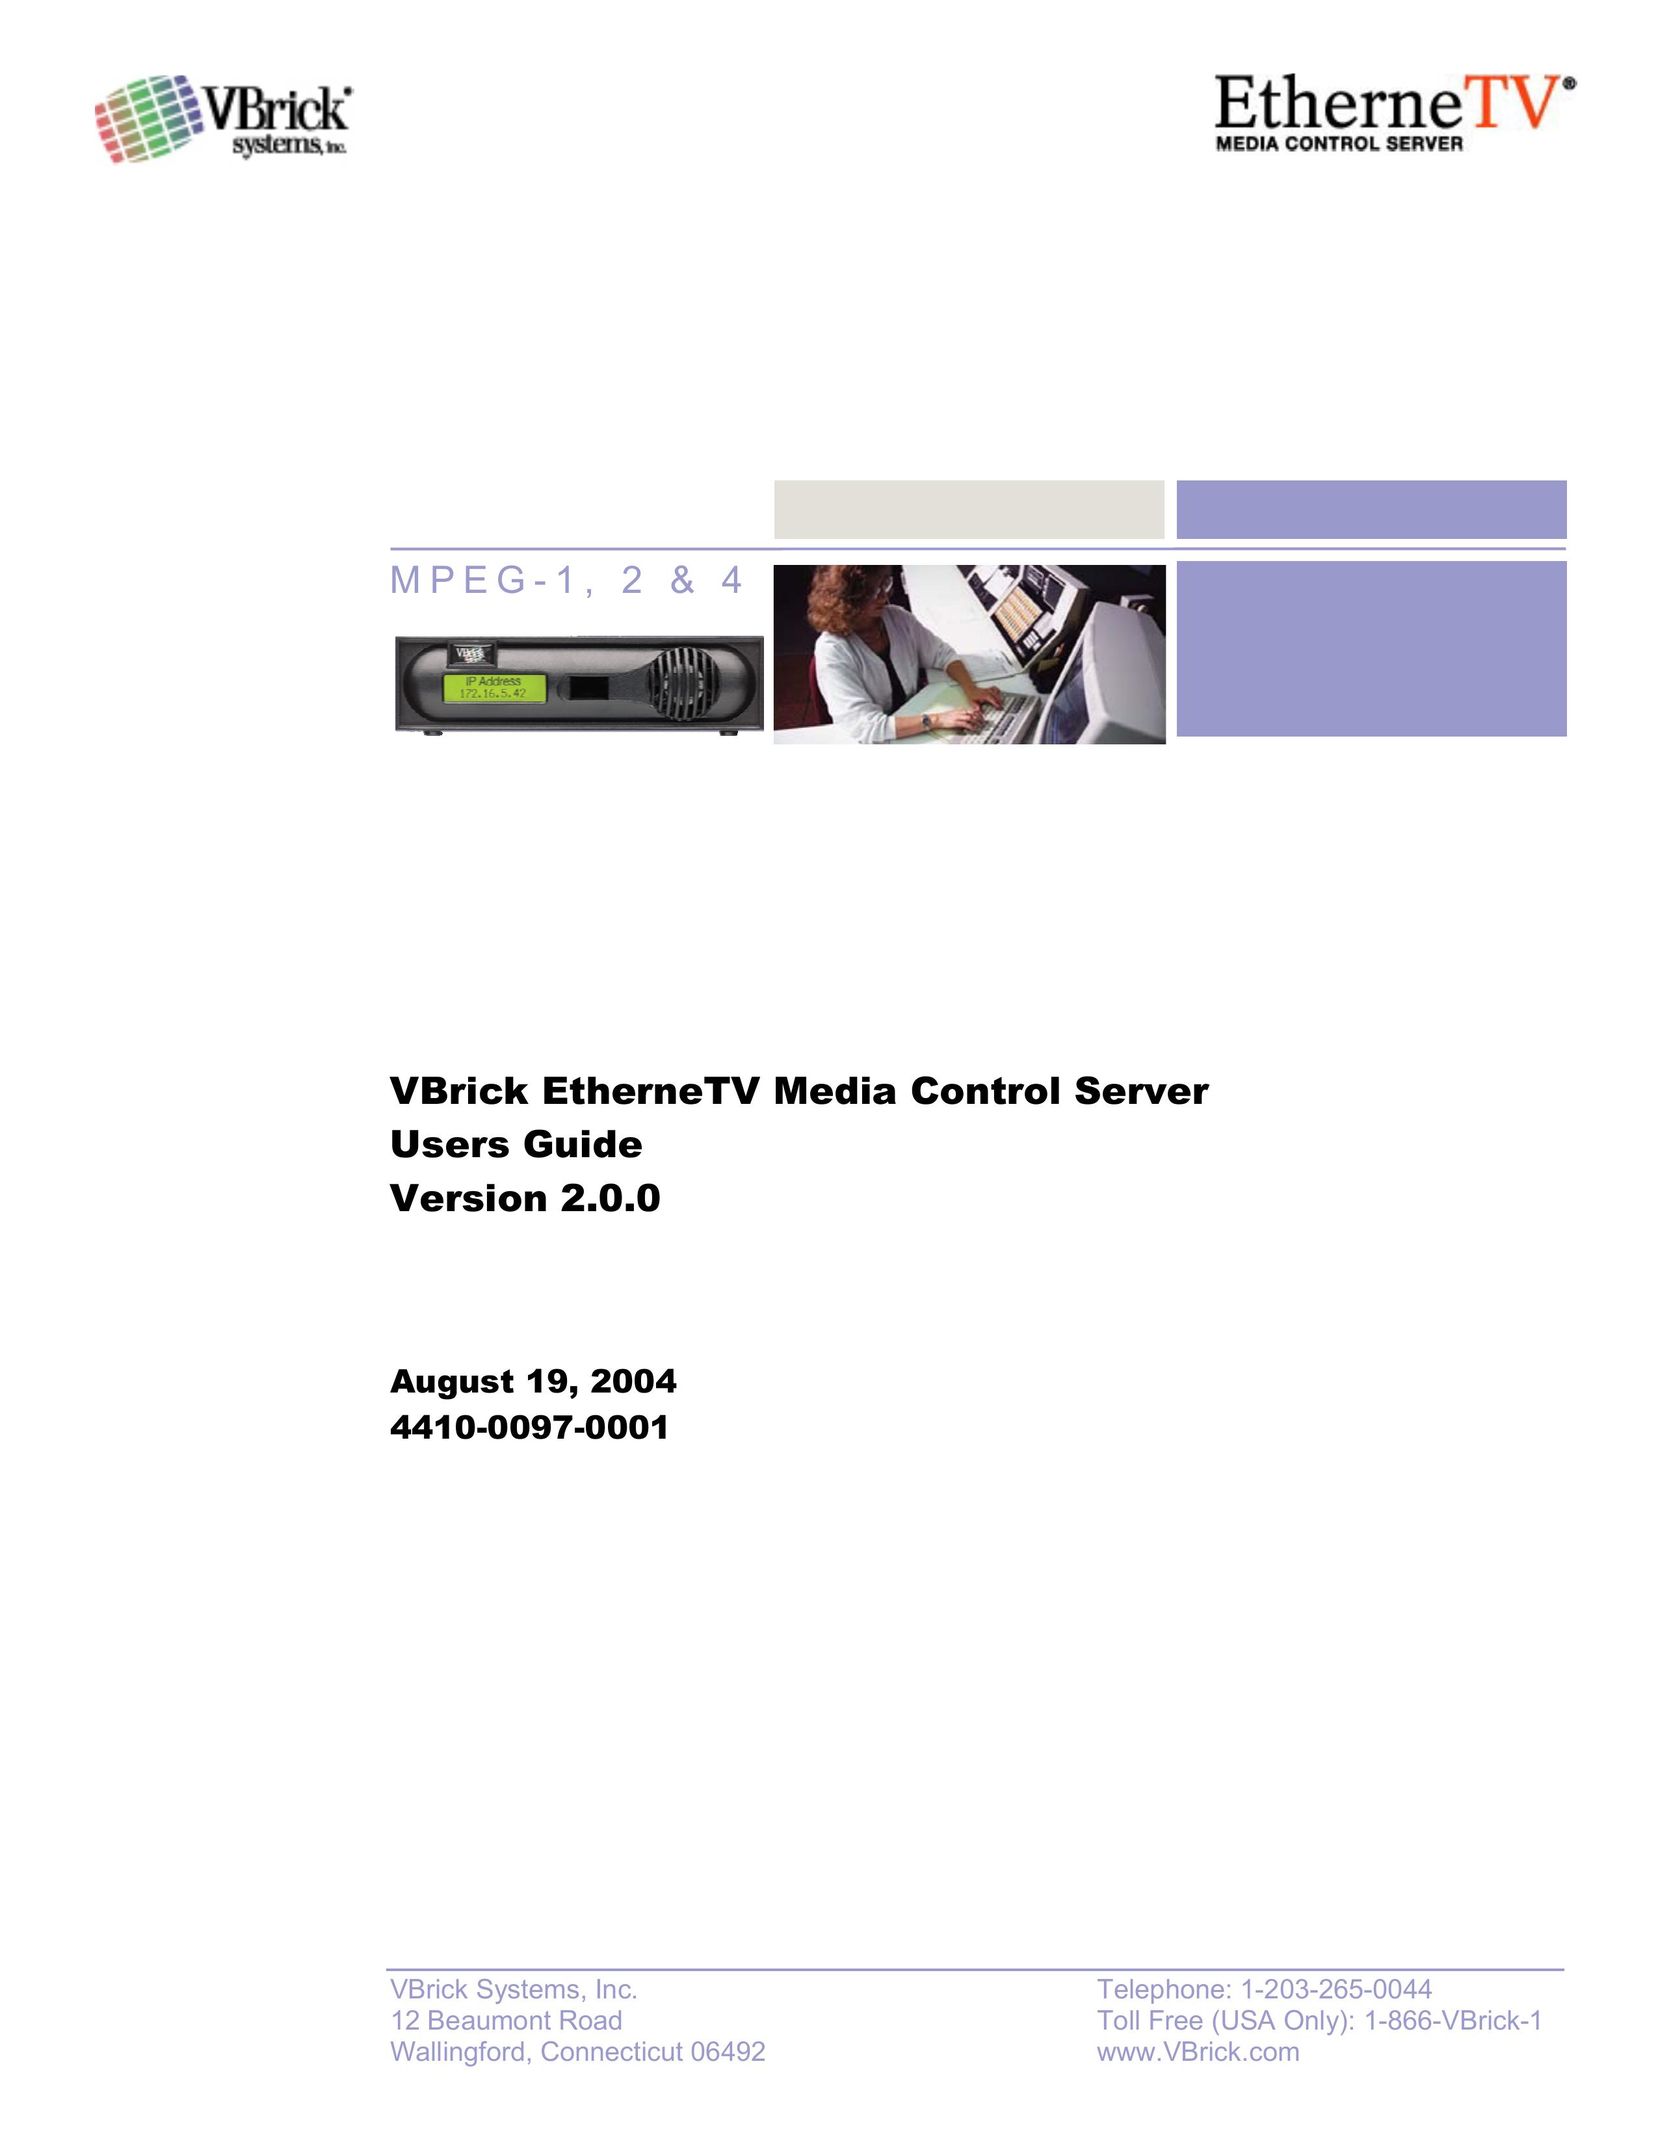 VBrick Systems Version 2.0.0 Switch User Manual